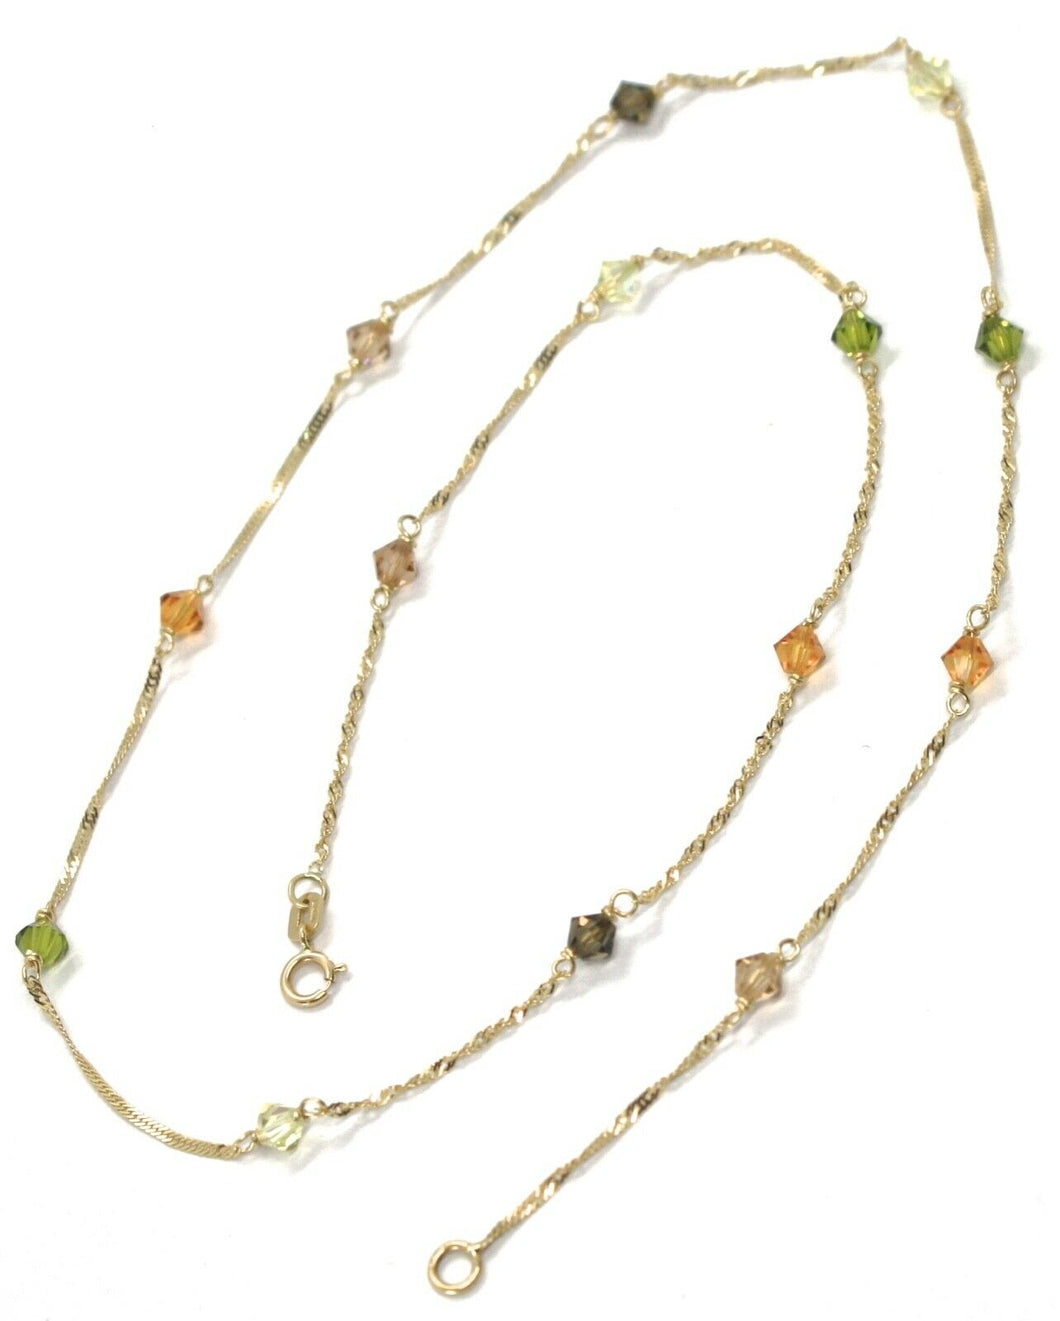 18K YELLOW GOLD NECKLACE, ALTERNATE FACETED MULTI COLOR CRYSTALS SINGAPORE CHAIN